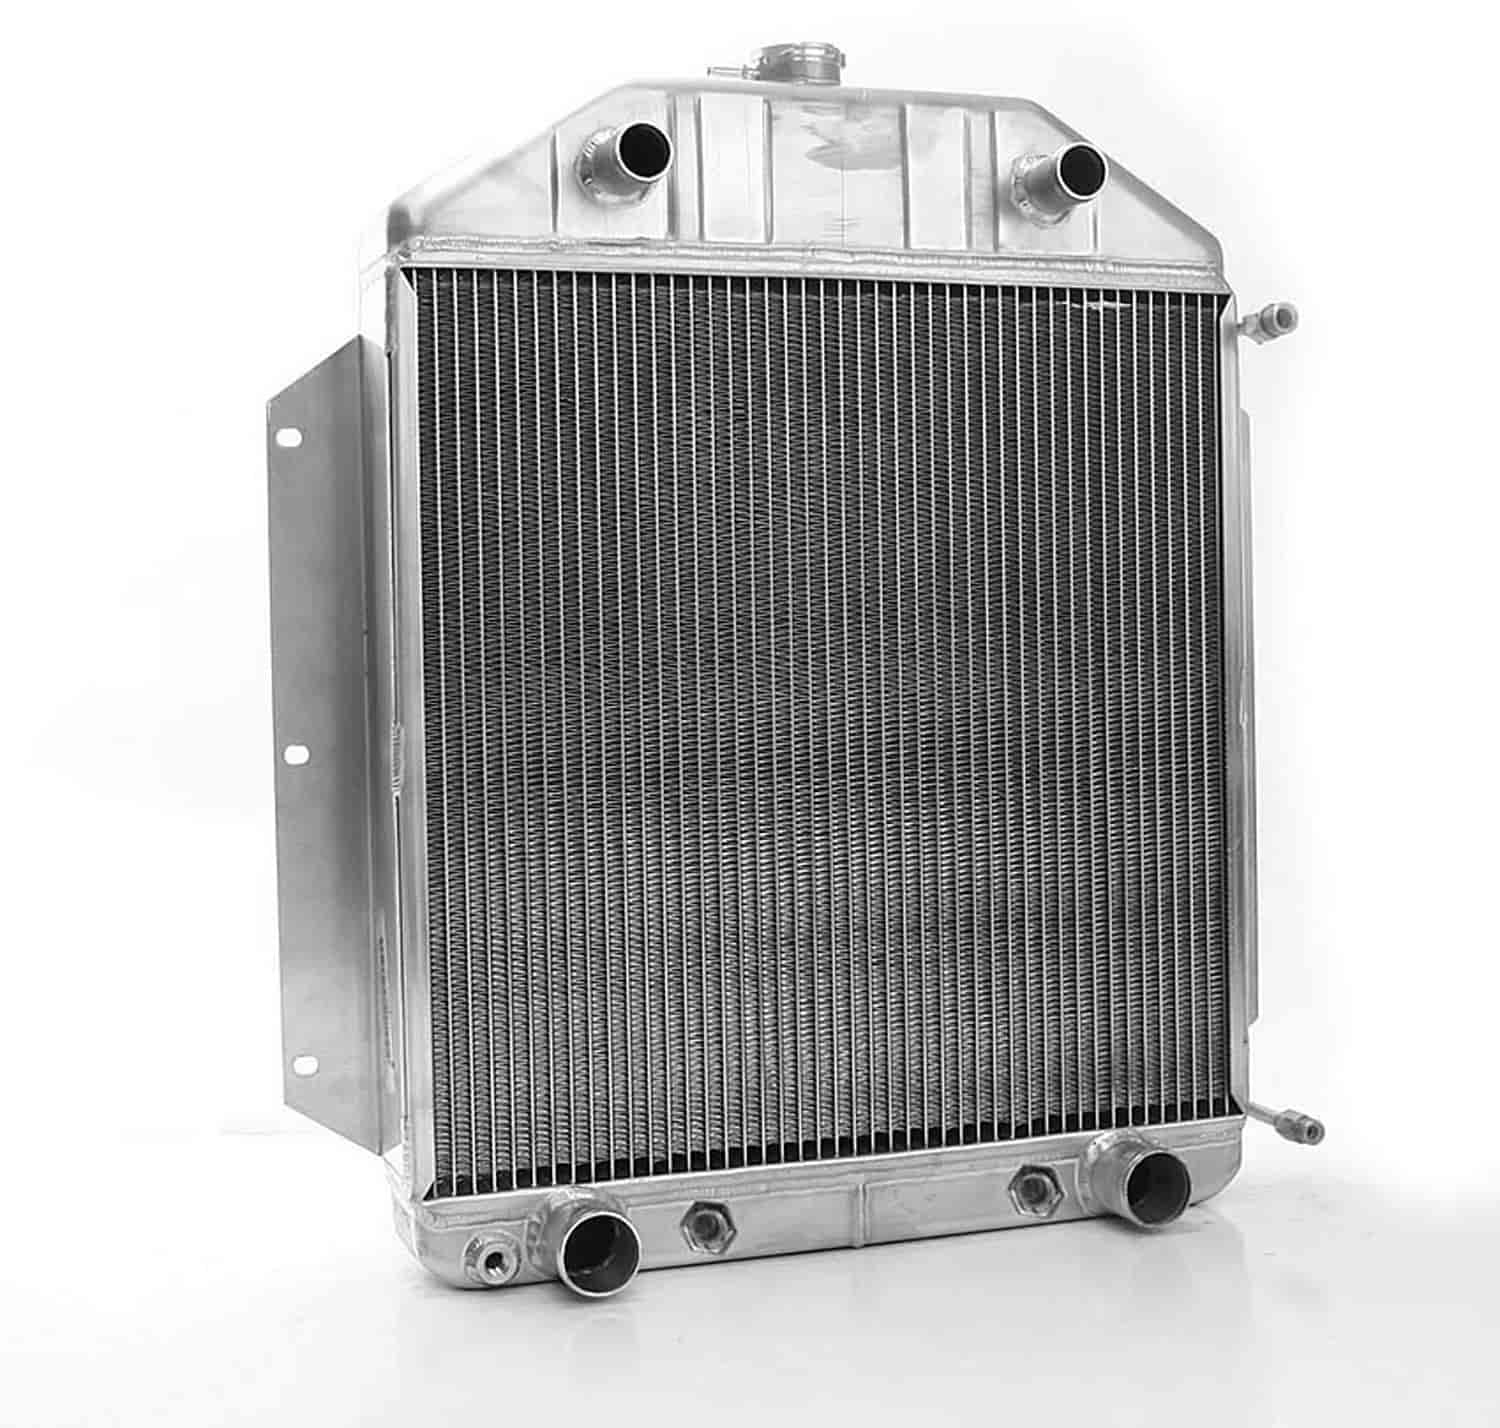 ExactFit Radiator for 1949-1953 Ford/Mercury Car with Late Ford Flathead V8